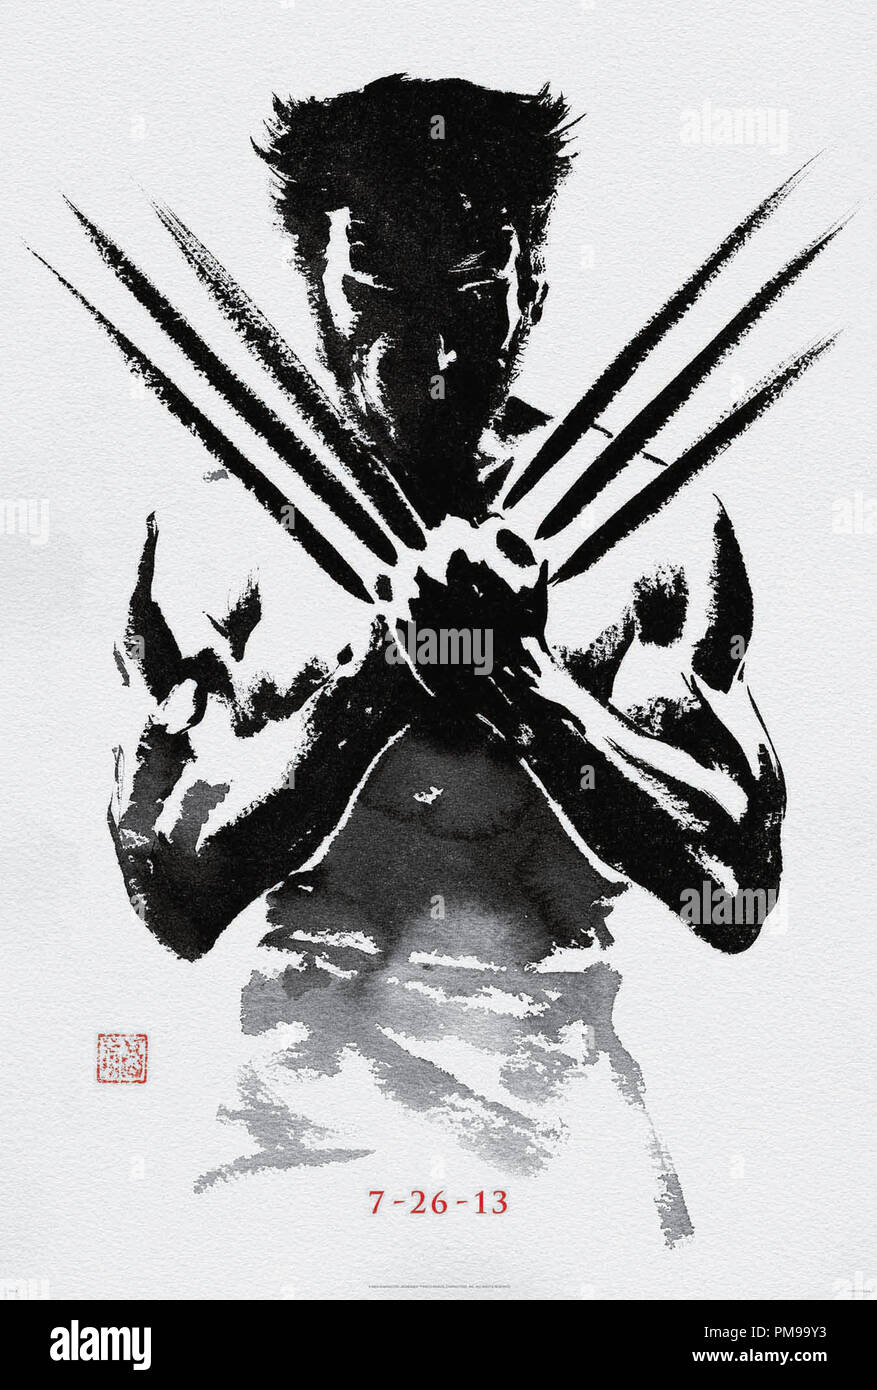 The Wolverine 2013 Poster Stock Photo